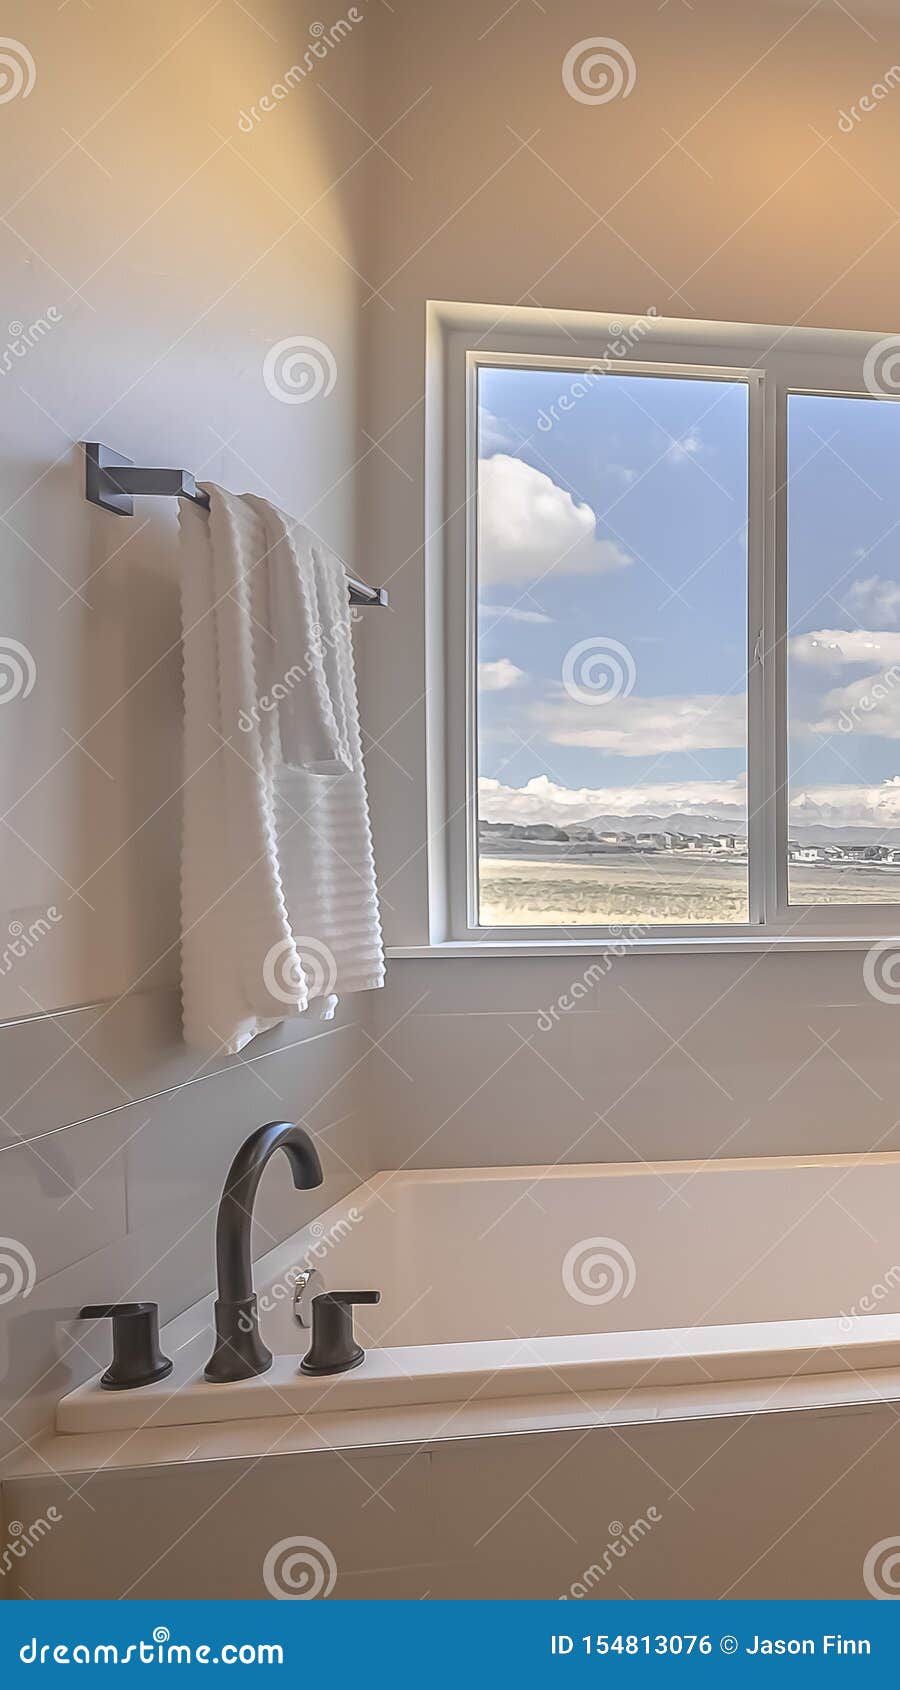 Vertical Frame Built In Square Bathtub Inside A Bathroom With White Wall And Sliding Window Stock Photo Image Of Floor Wall 154813076